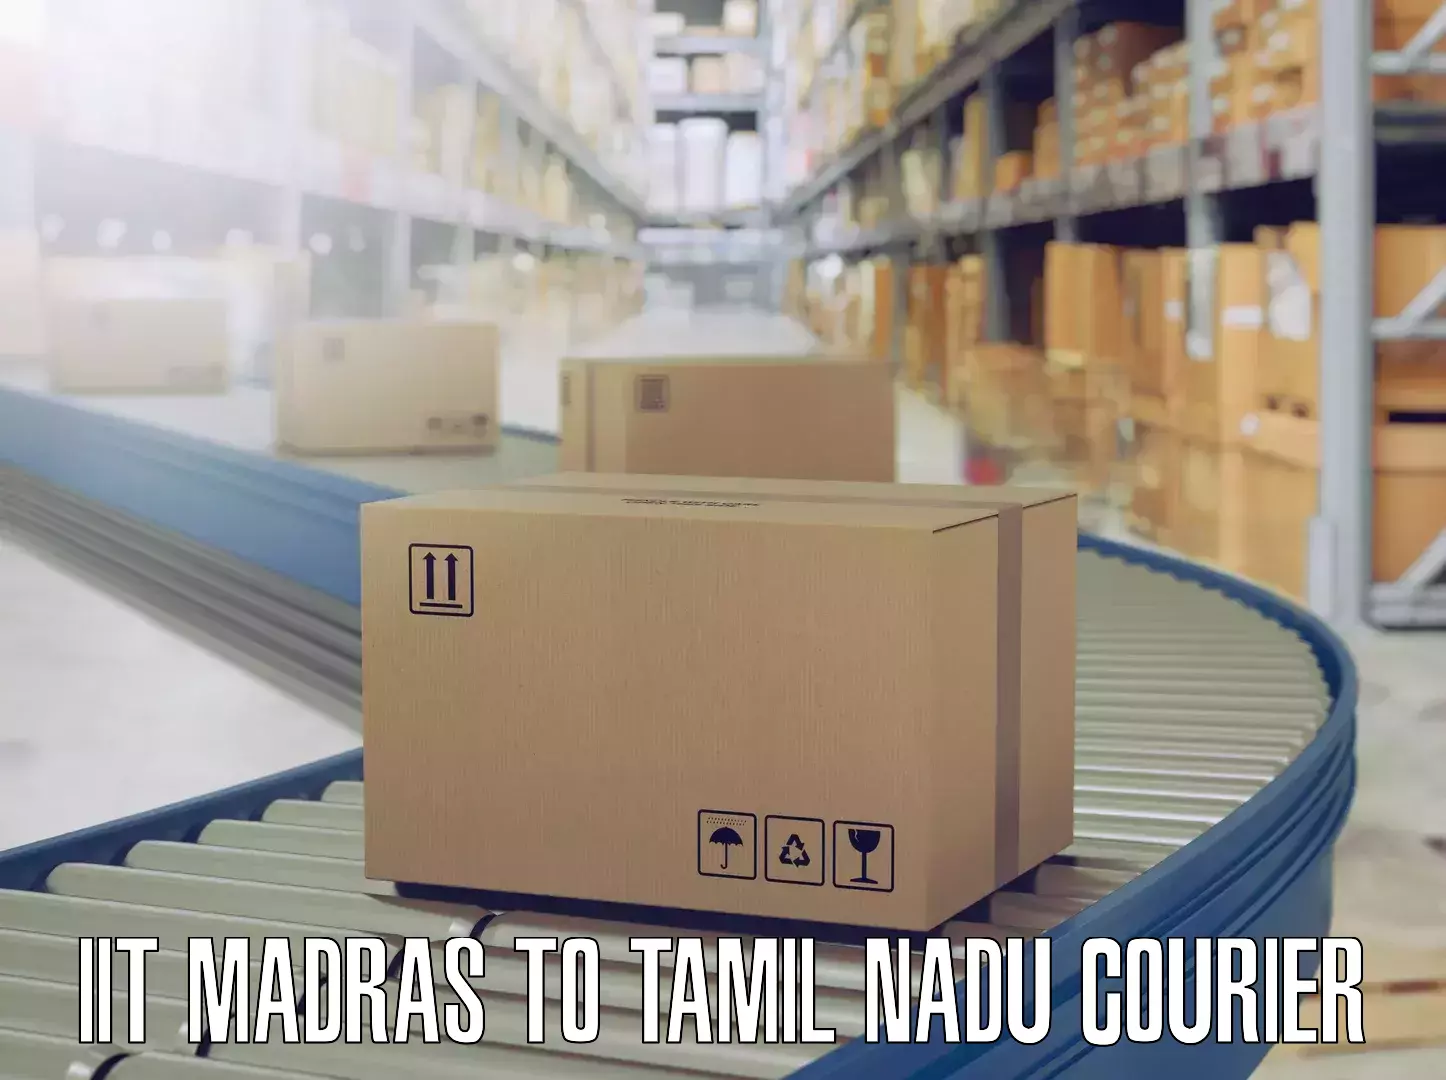 Furniture delivery service IIT Madras to Tamil Nadu